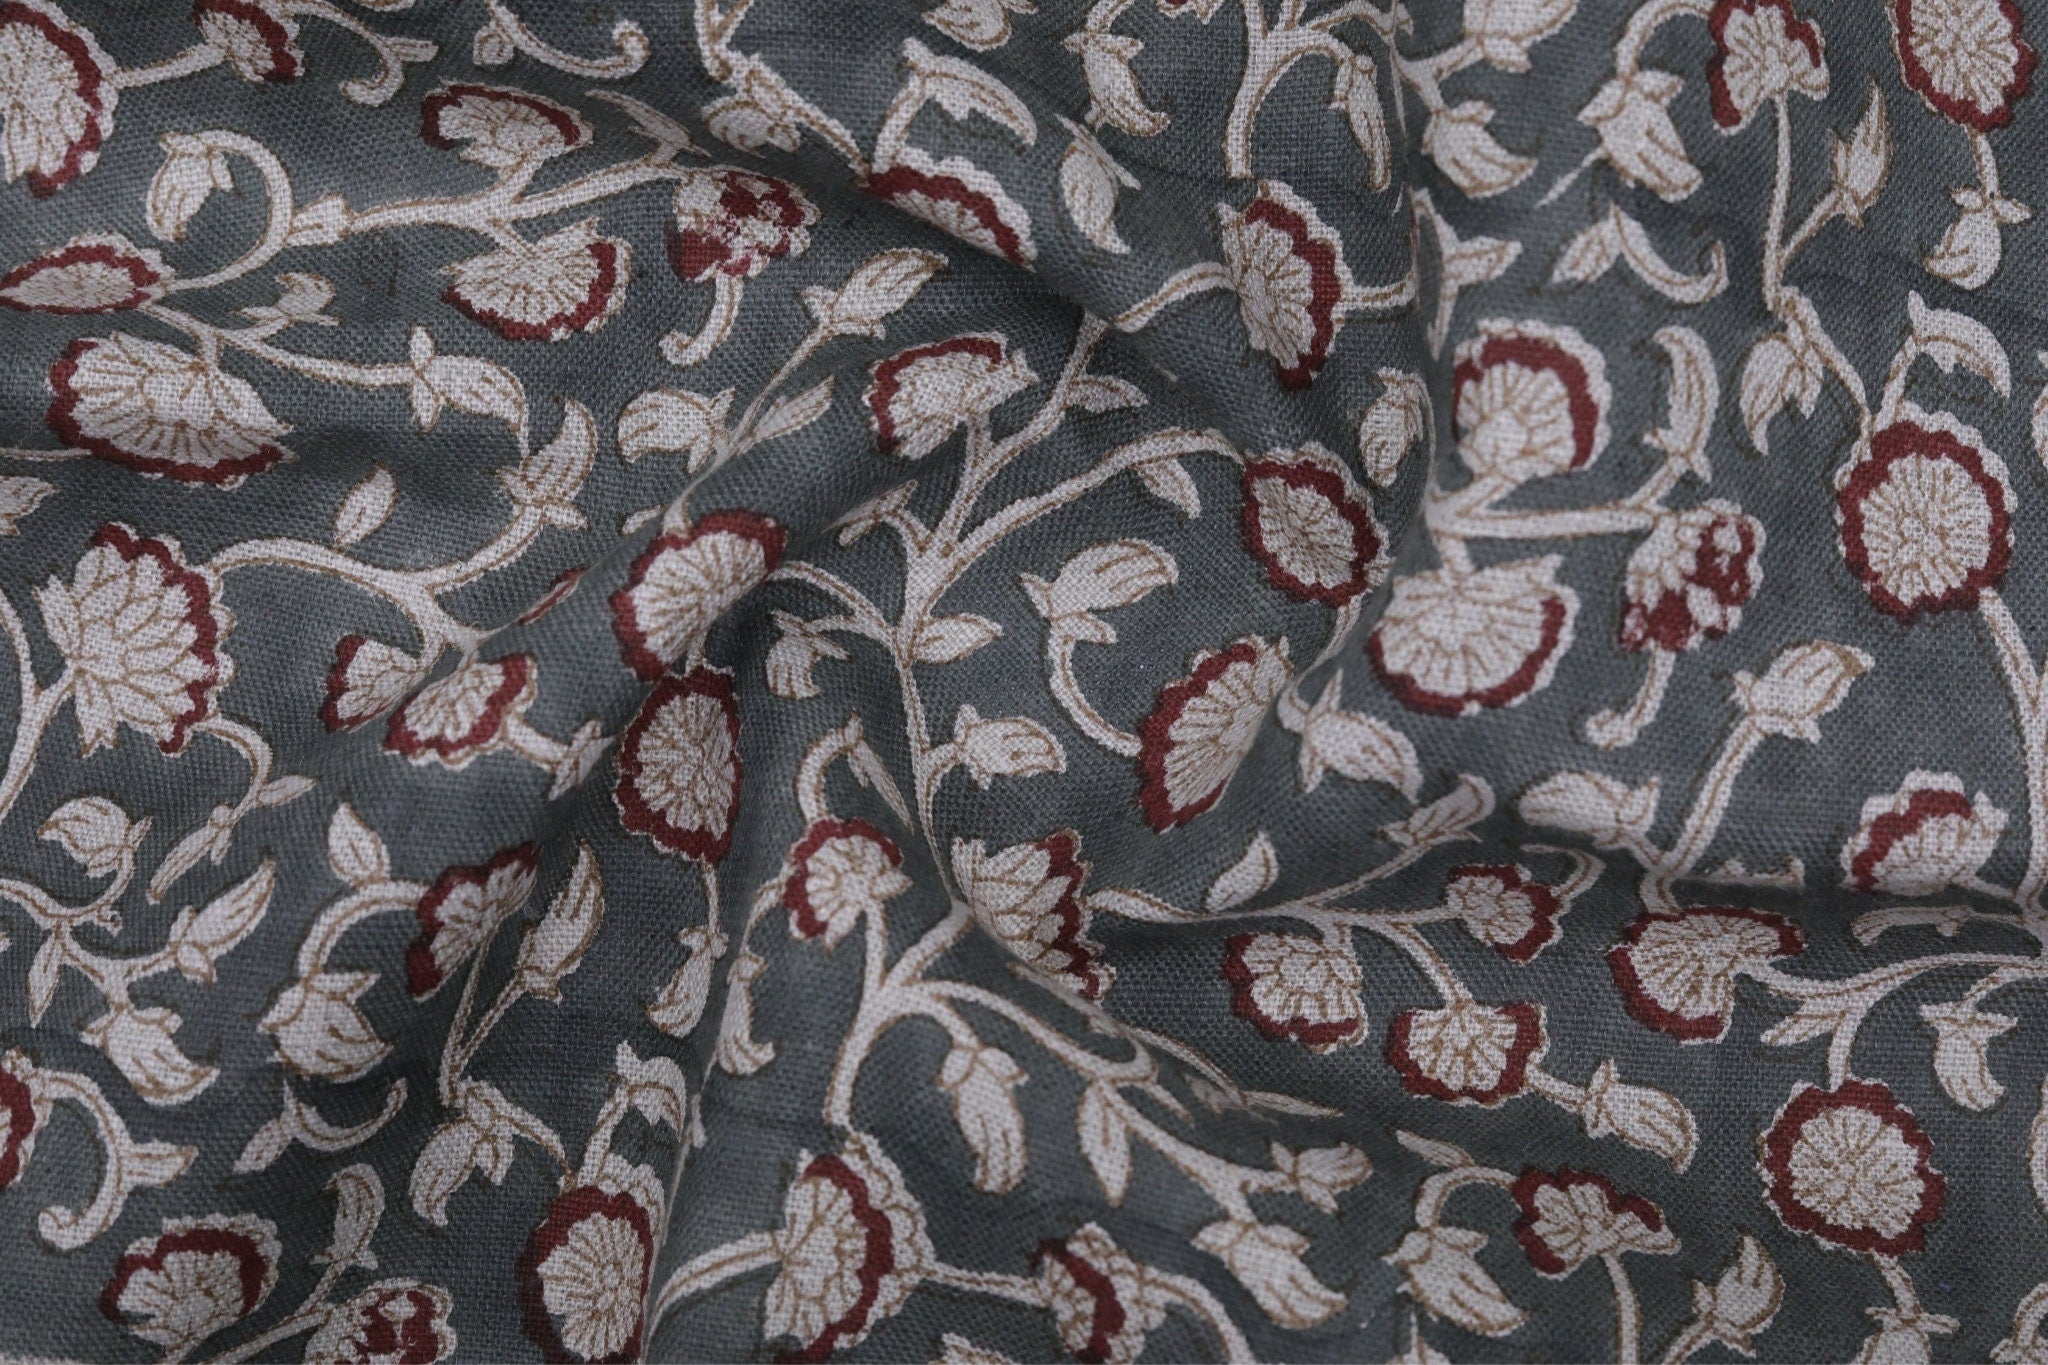 Fabric for cushion, pillows, pure linen, Indian handmade floral art, linen clothing fabric - HIMACHAL